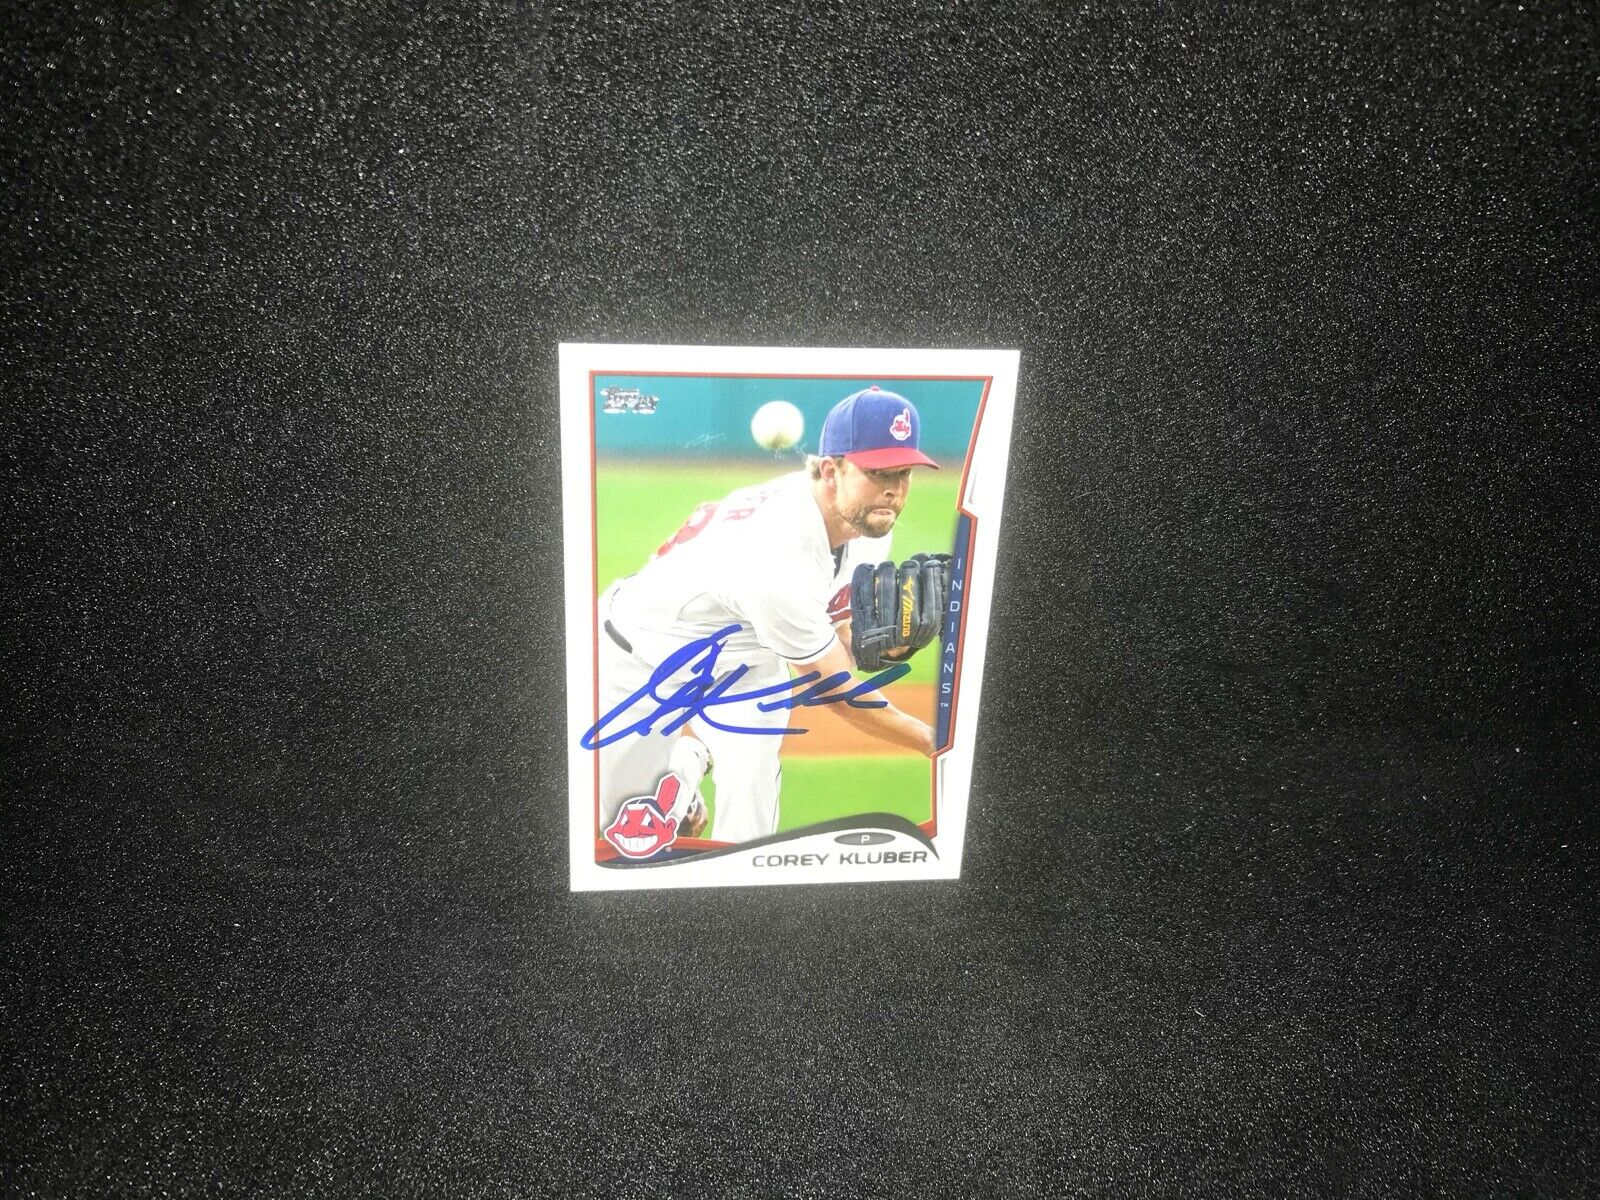 Corey Kluber Indians Rangers Autographed Signed 2014 Topps Mini #279